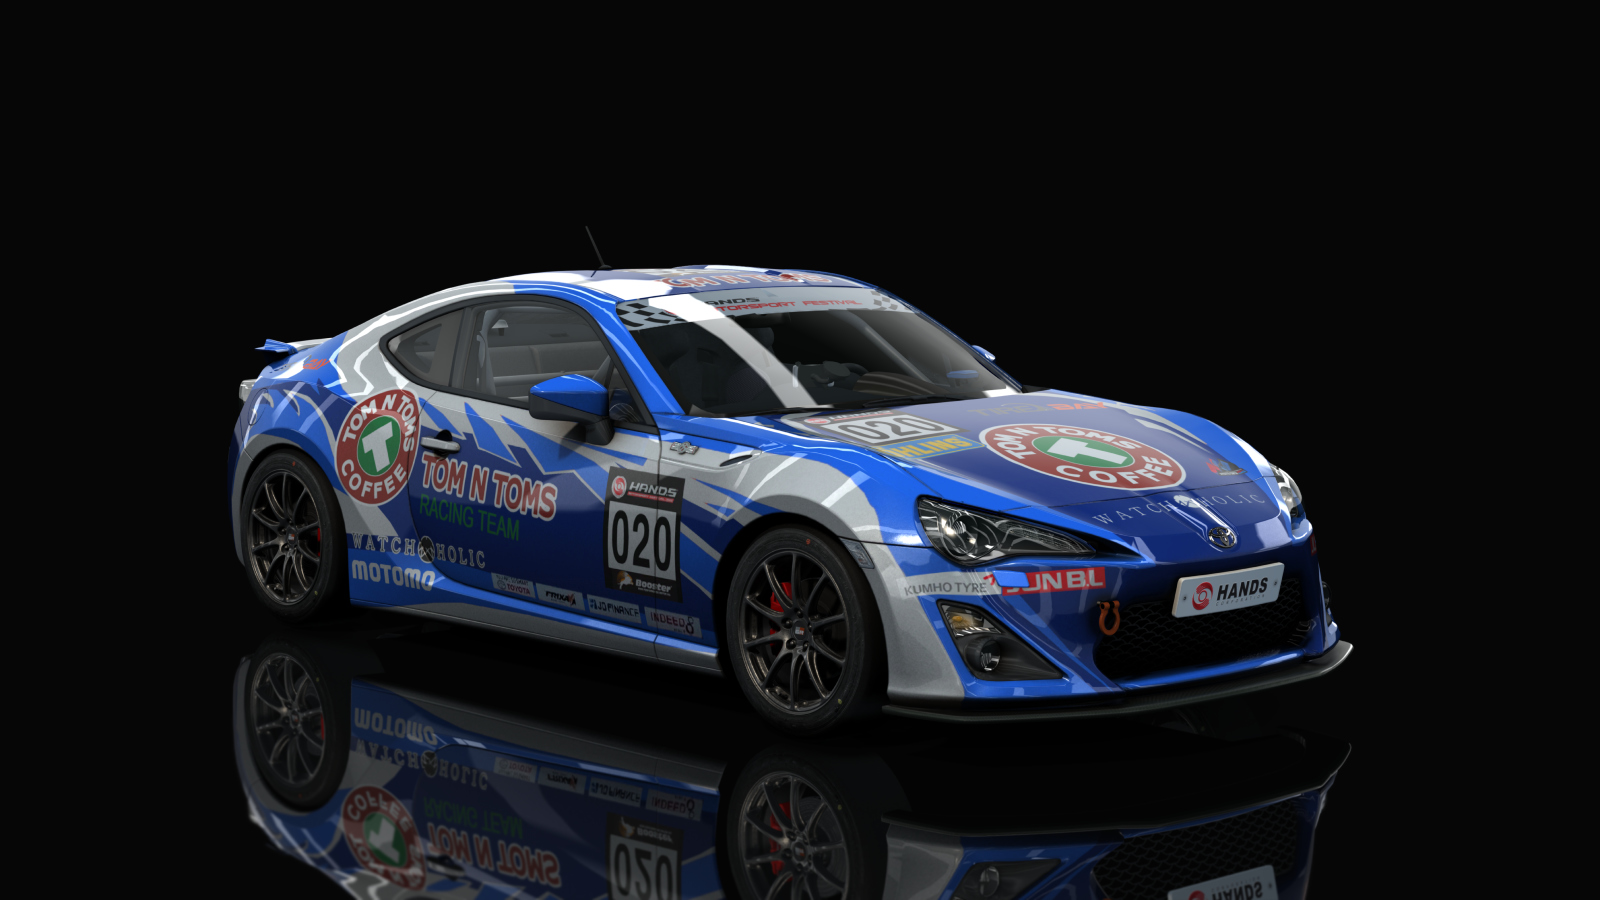 Toyota GT86 Cup, skin 020_TOMnTOMS